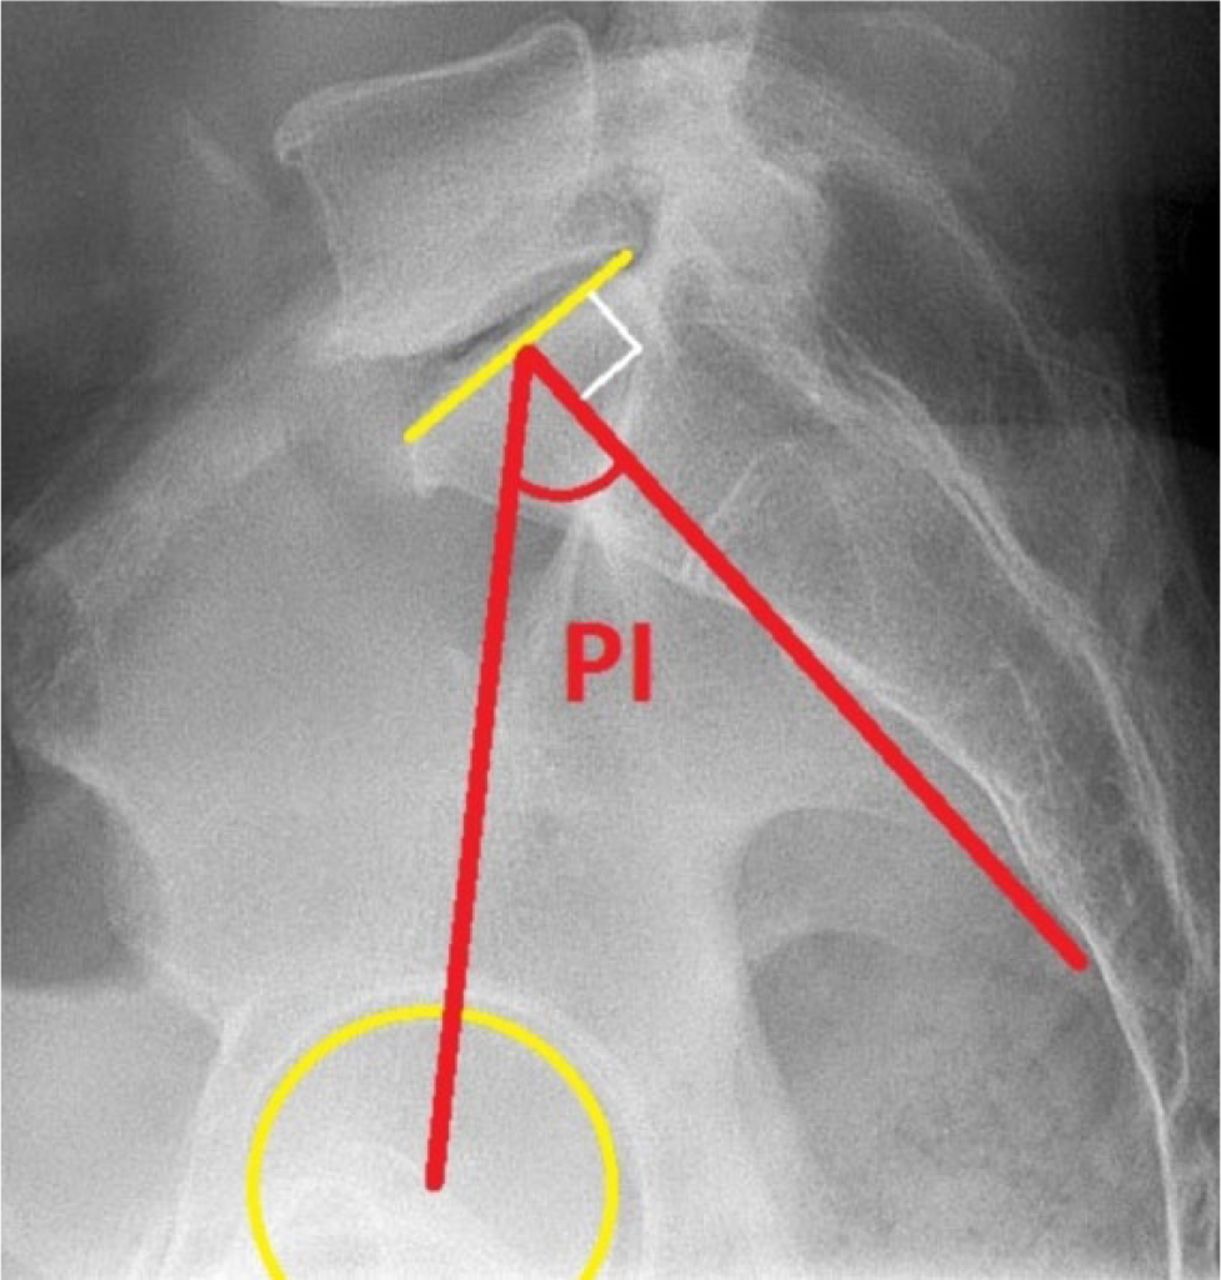 Fig. 1 
          Radiograph showing an example of radiographic measurement of pelvic incidence obtained clinically from a lateral radiograph of the lumbosacral spine.
        